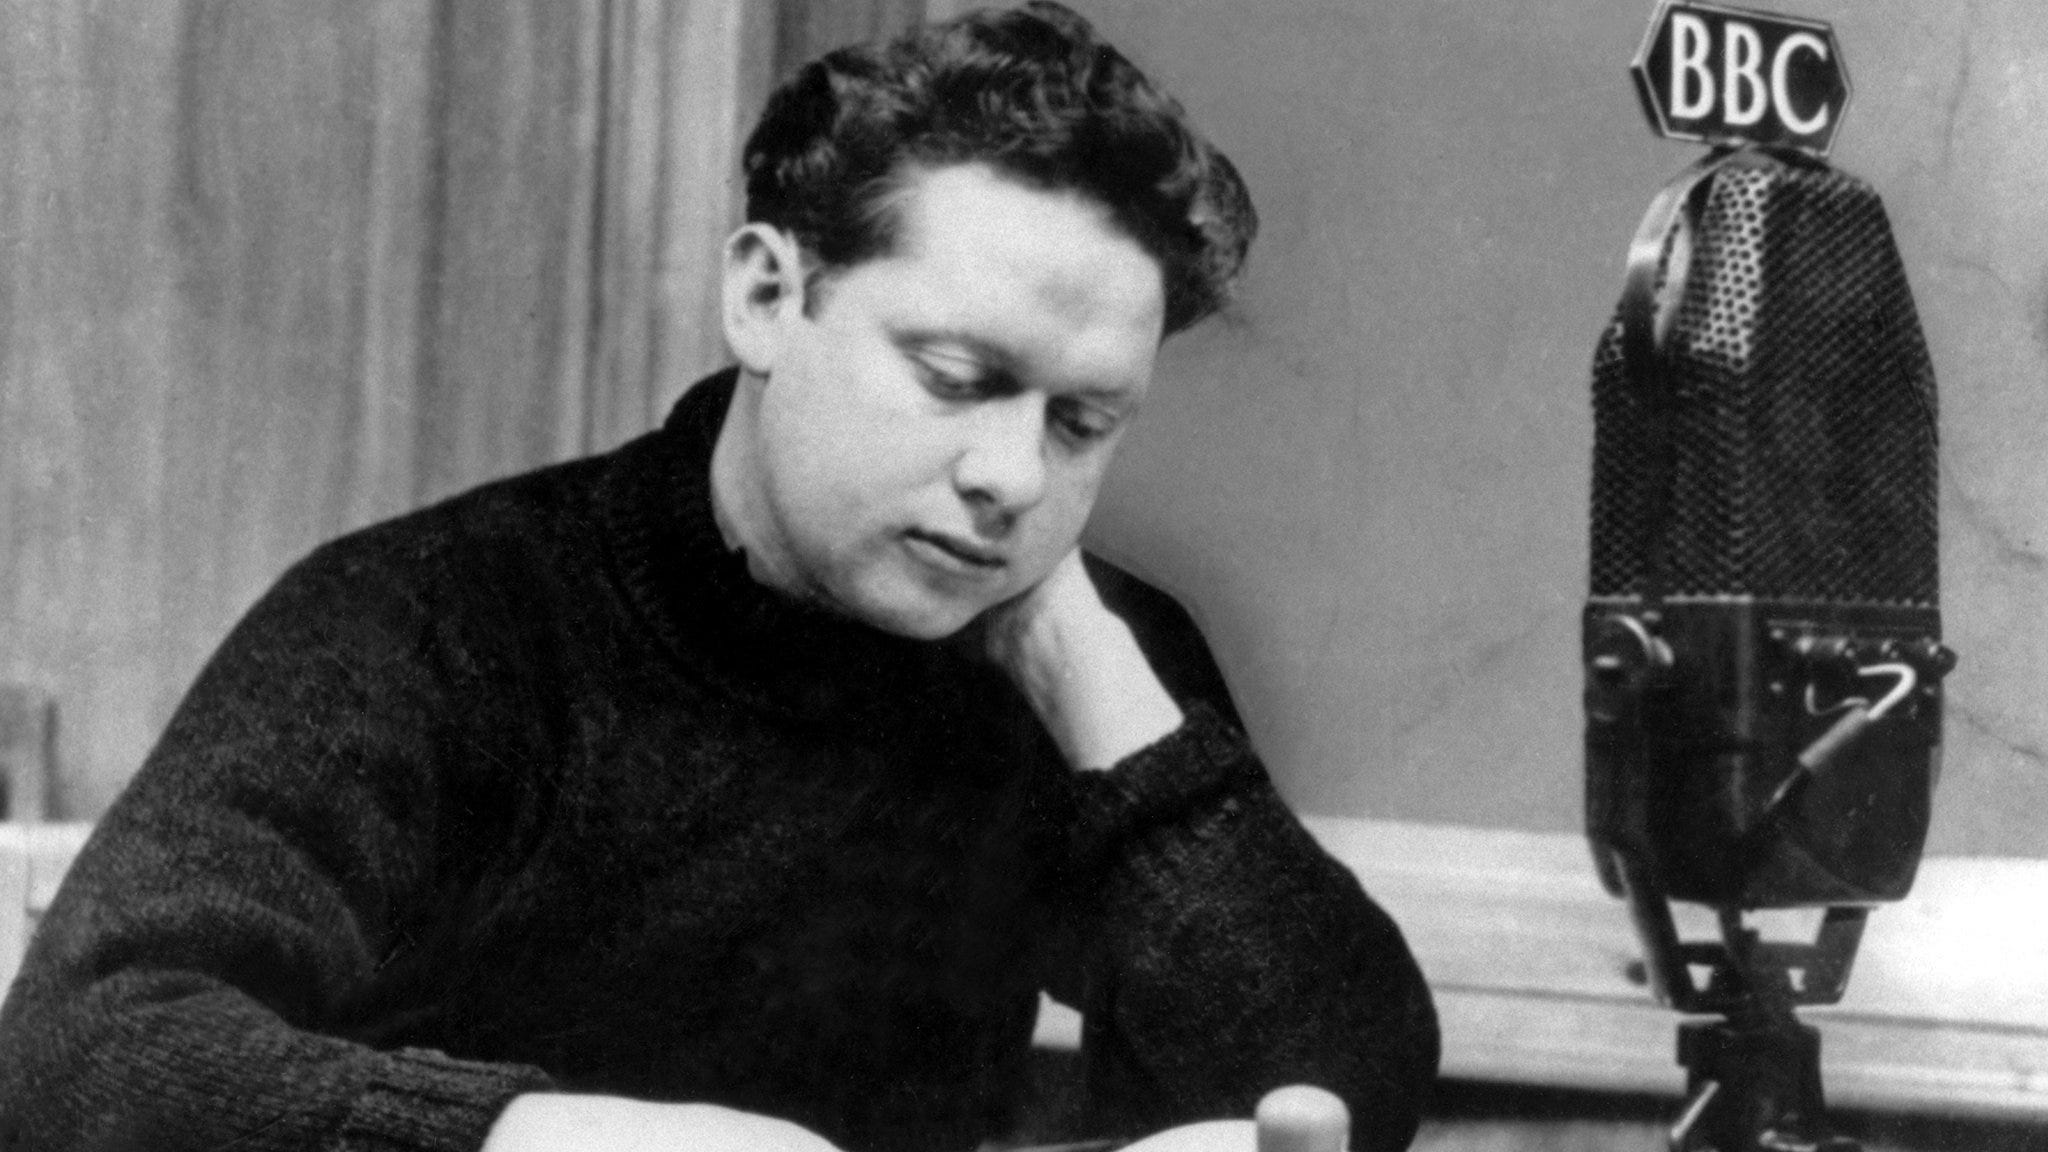 Dylan Thomas’ ”And Death Shall Have No Dominion”